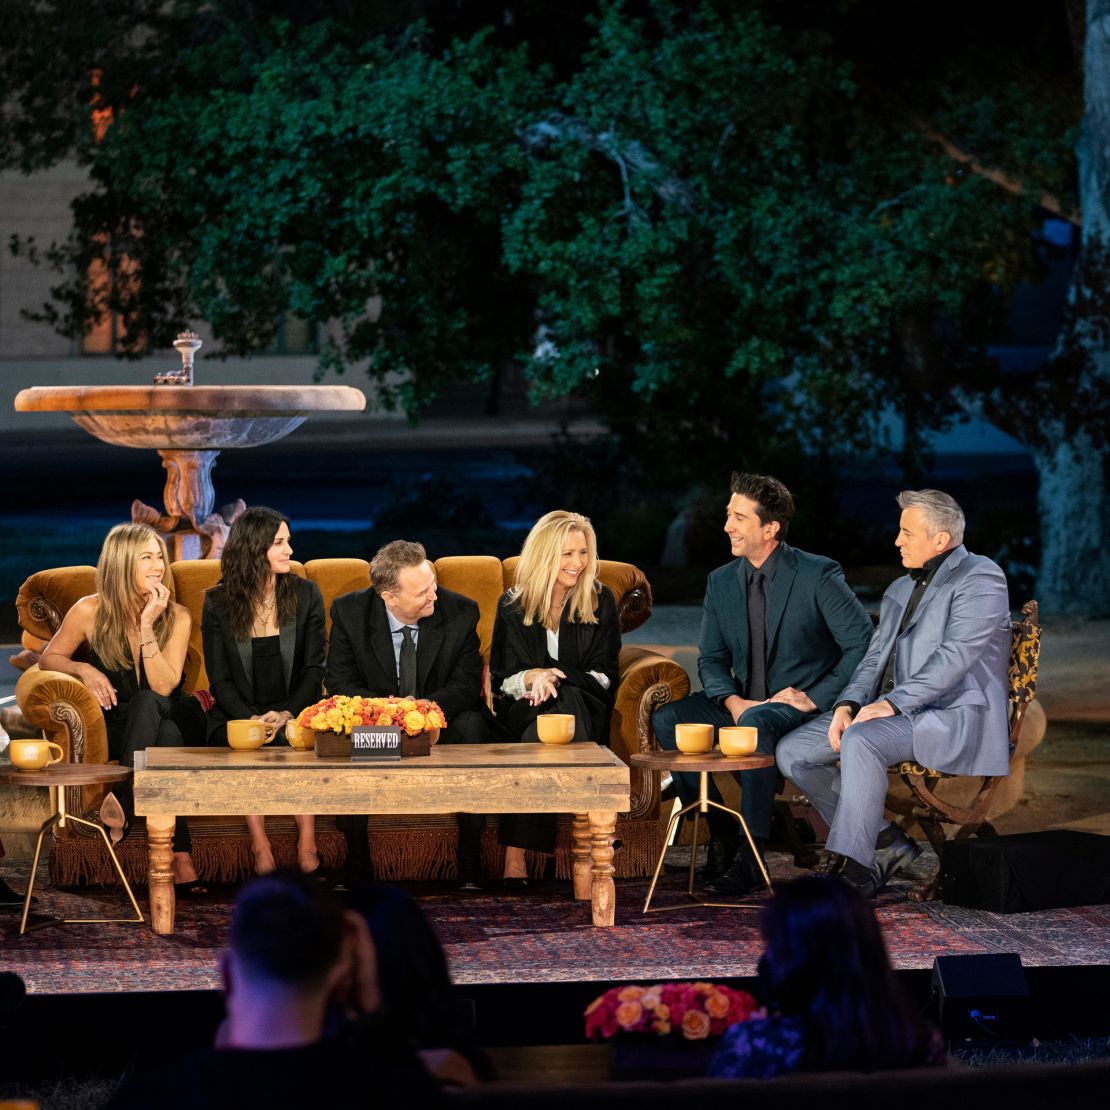 After months of delays,  the "Friends" reunion special airs Thursday on HBO Max.